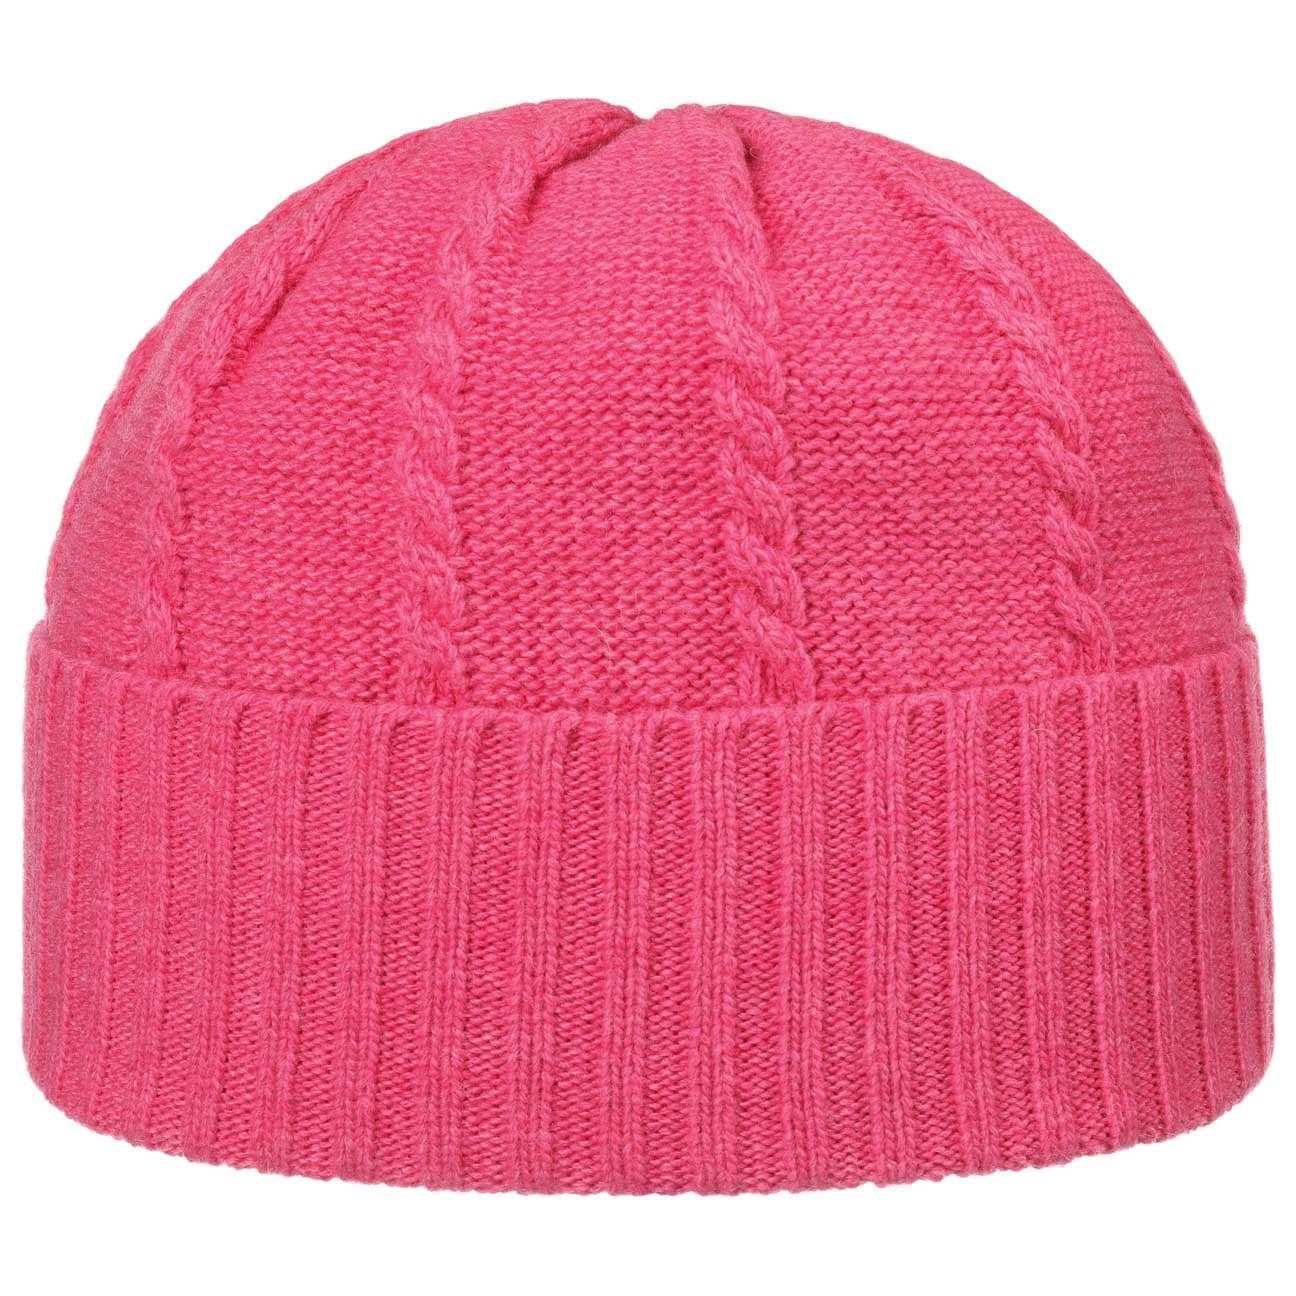 Lierys Beanie (1-St) Beanie mit Umschlag, Made in Italy,Made in the EU pink